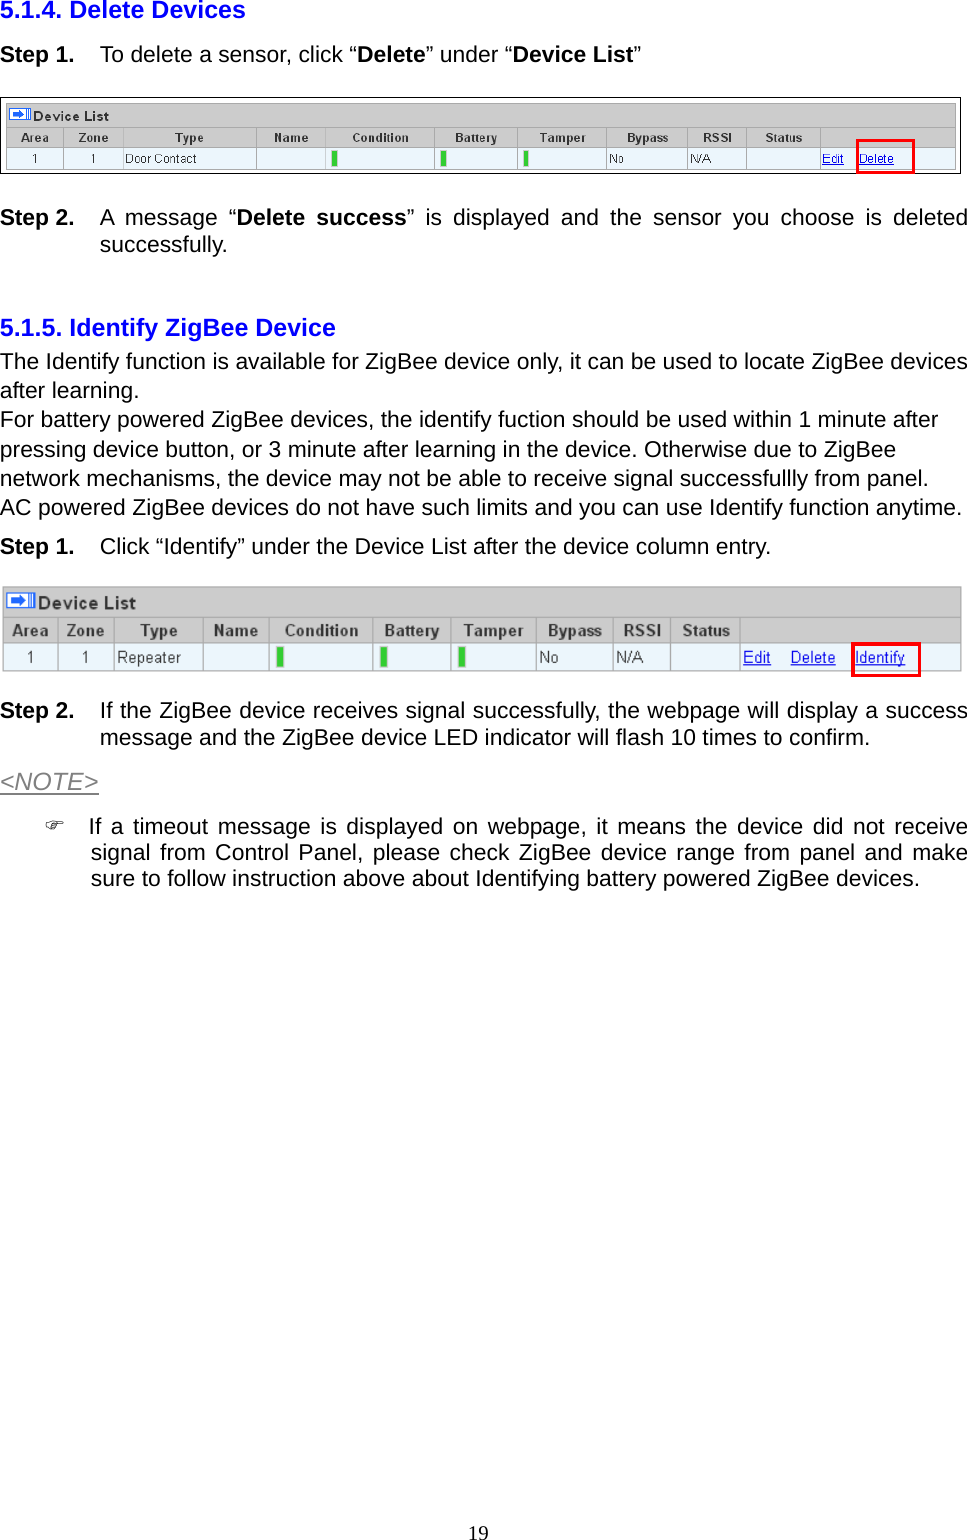  195.1.4. Delete Devices   Step 1.  To delete a sensor, click “Delete” under “Device List”   Step 2.  A message “Delete success” is displayed and the sensor you choose is deleted successfully.     5.1.5. Identify ZigBee Device   The Identify function is available for ZigBee device only, it can be used to locate ZigBee devices after learning. For battery powered ZigBee devices, the identify fuction should be used within 1 minute after pressing device button, or 3 minute after learning in the device. Otherwise due to ZigBee network mechanisms, the device may not be able to receive signal successfullly from panel. AC powered ZigBee devices do not have such limits and you can use Identify function anytime. Step 1.  Click “Identify” under the Device List after the device column entry.  Step 2.  If the ZigBee device receives signal successfully, the webpage will display a success message and the ZigBee device LED indicator will flash 10 times to confirm. &lt;NOTE&gt;   If a timeout message is displayed on webpage, it means the device did not receive signal from Control Panel, please check ZigBee device range from panel and make sure to follow instruction above about Identifying battery powered ZigBee devices.                 